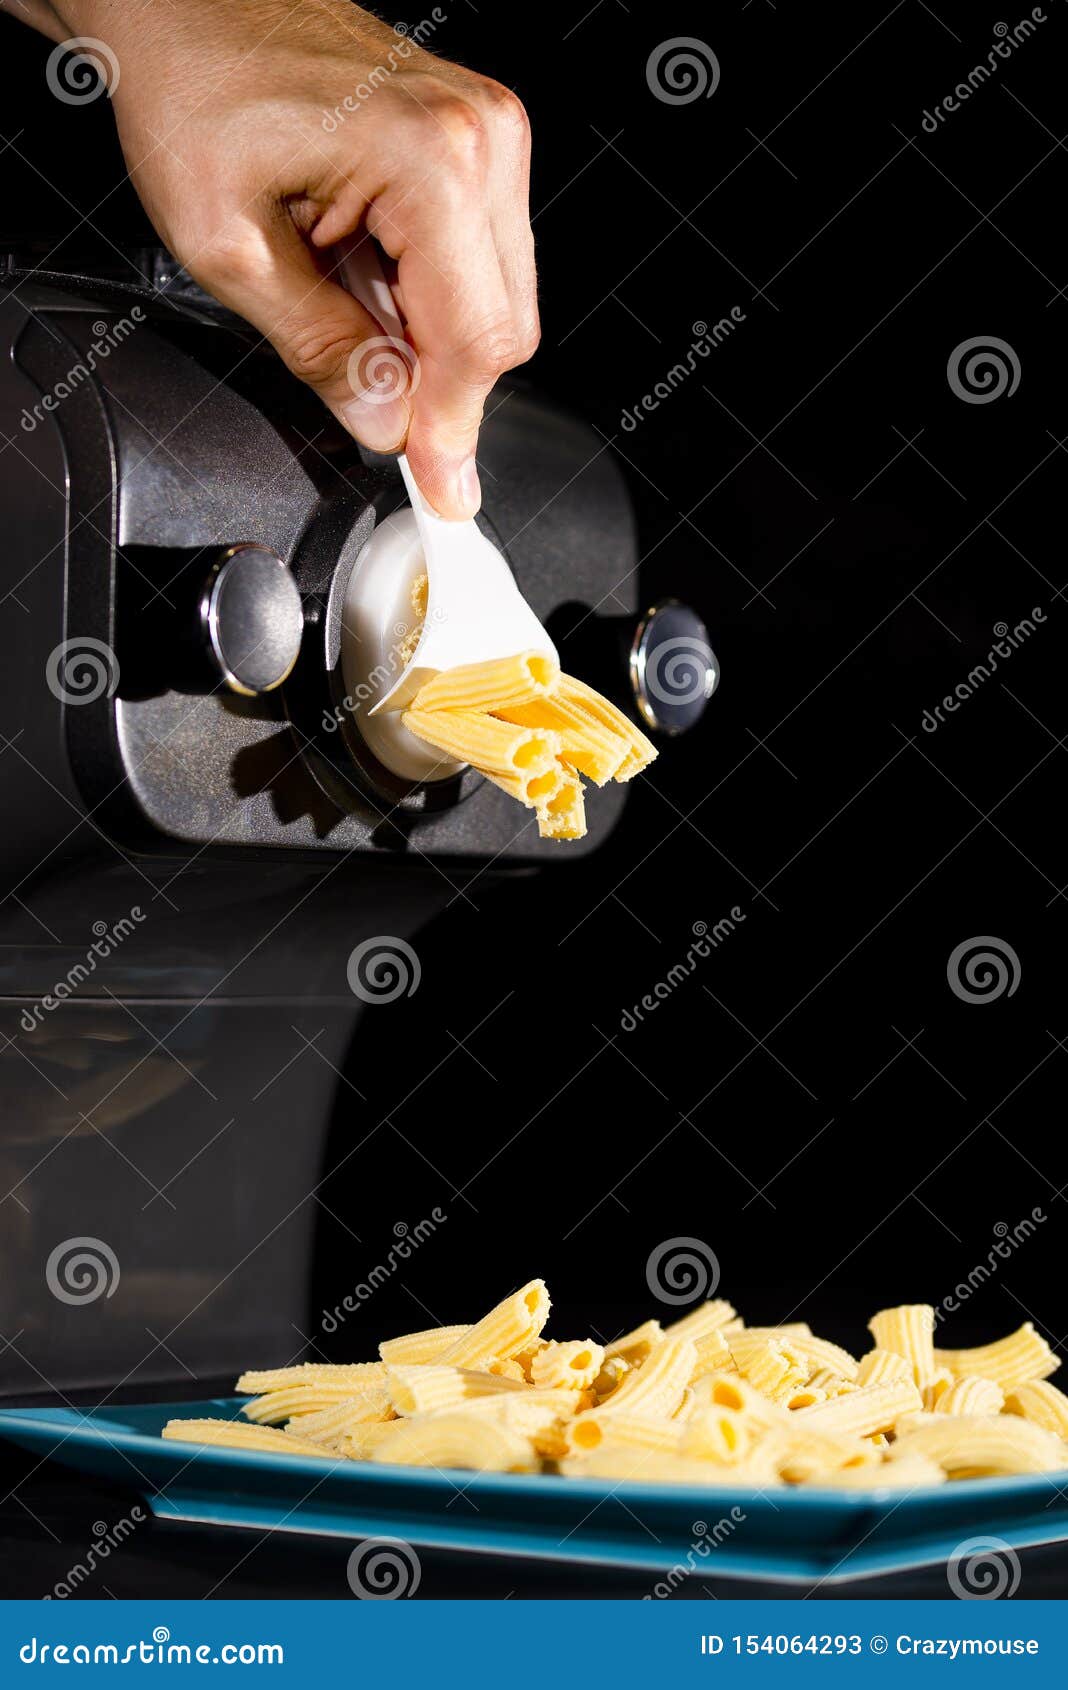 Home Made Pasta by Pasta Maker. an Indifinited Man Cutting the Rigatoni  Stock Image - Image of dinnertime, uncooked: 154064293